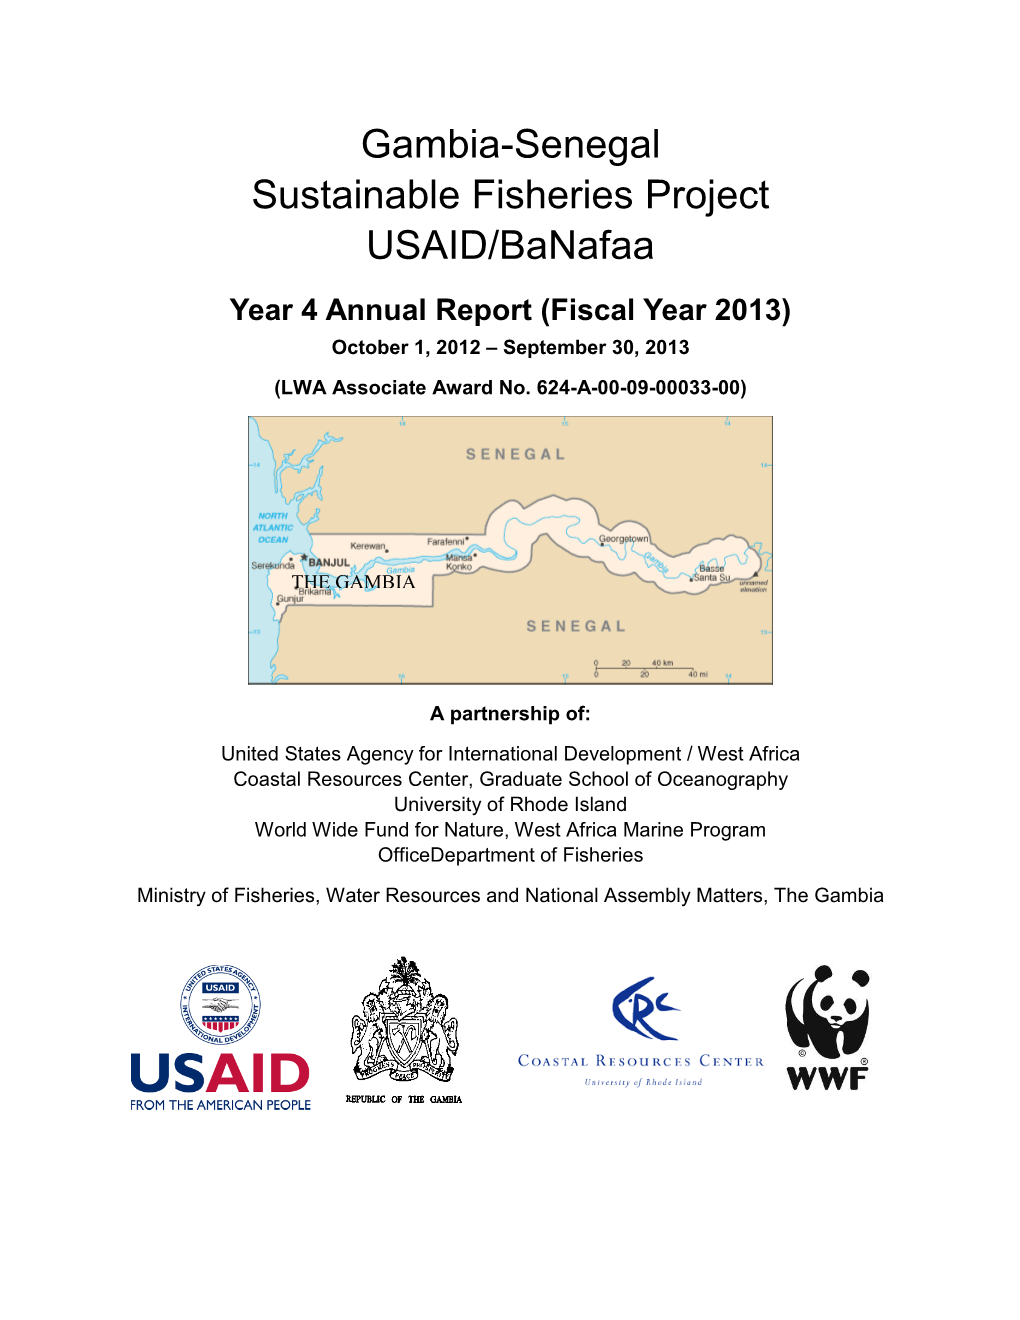 Gambia-Senegal Sustainable Fisheries Project USAID/Banafaa Year 4 Annual Report (Fiscal Year 2013) October 1, 2012 – September 30, 2013